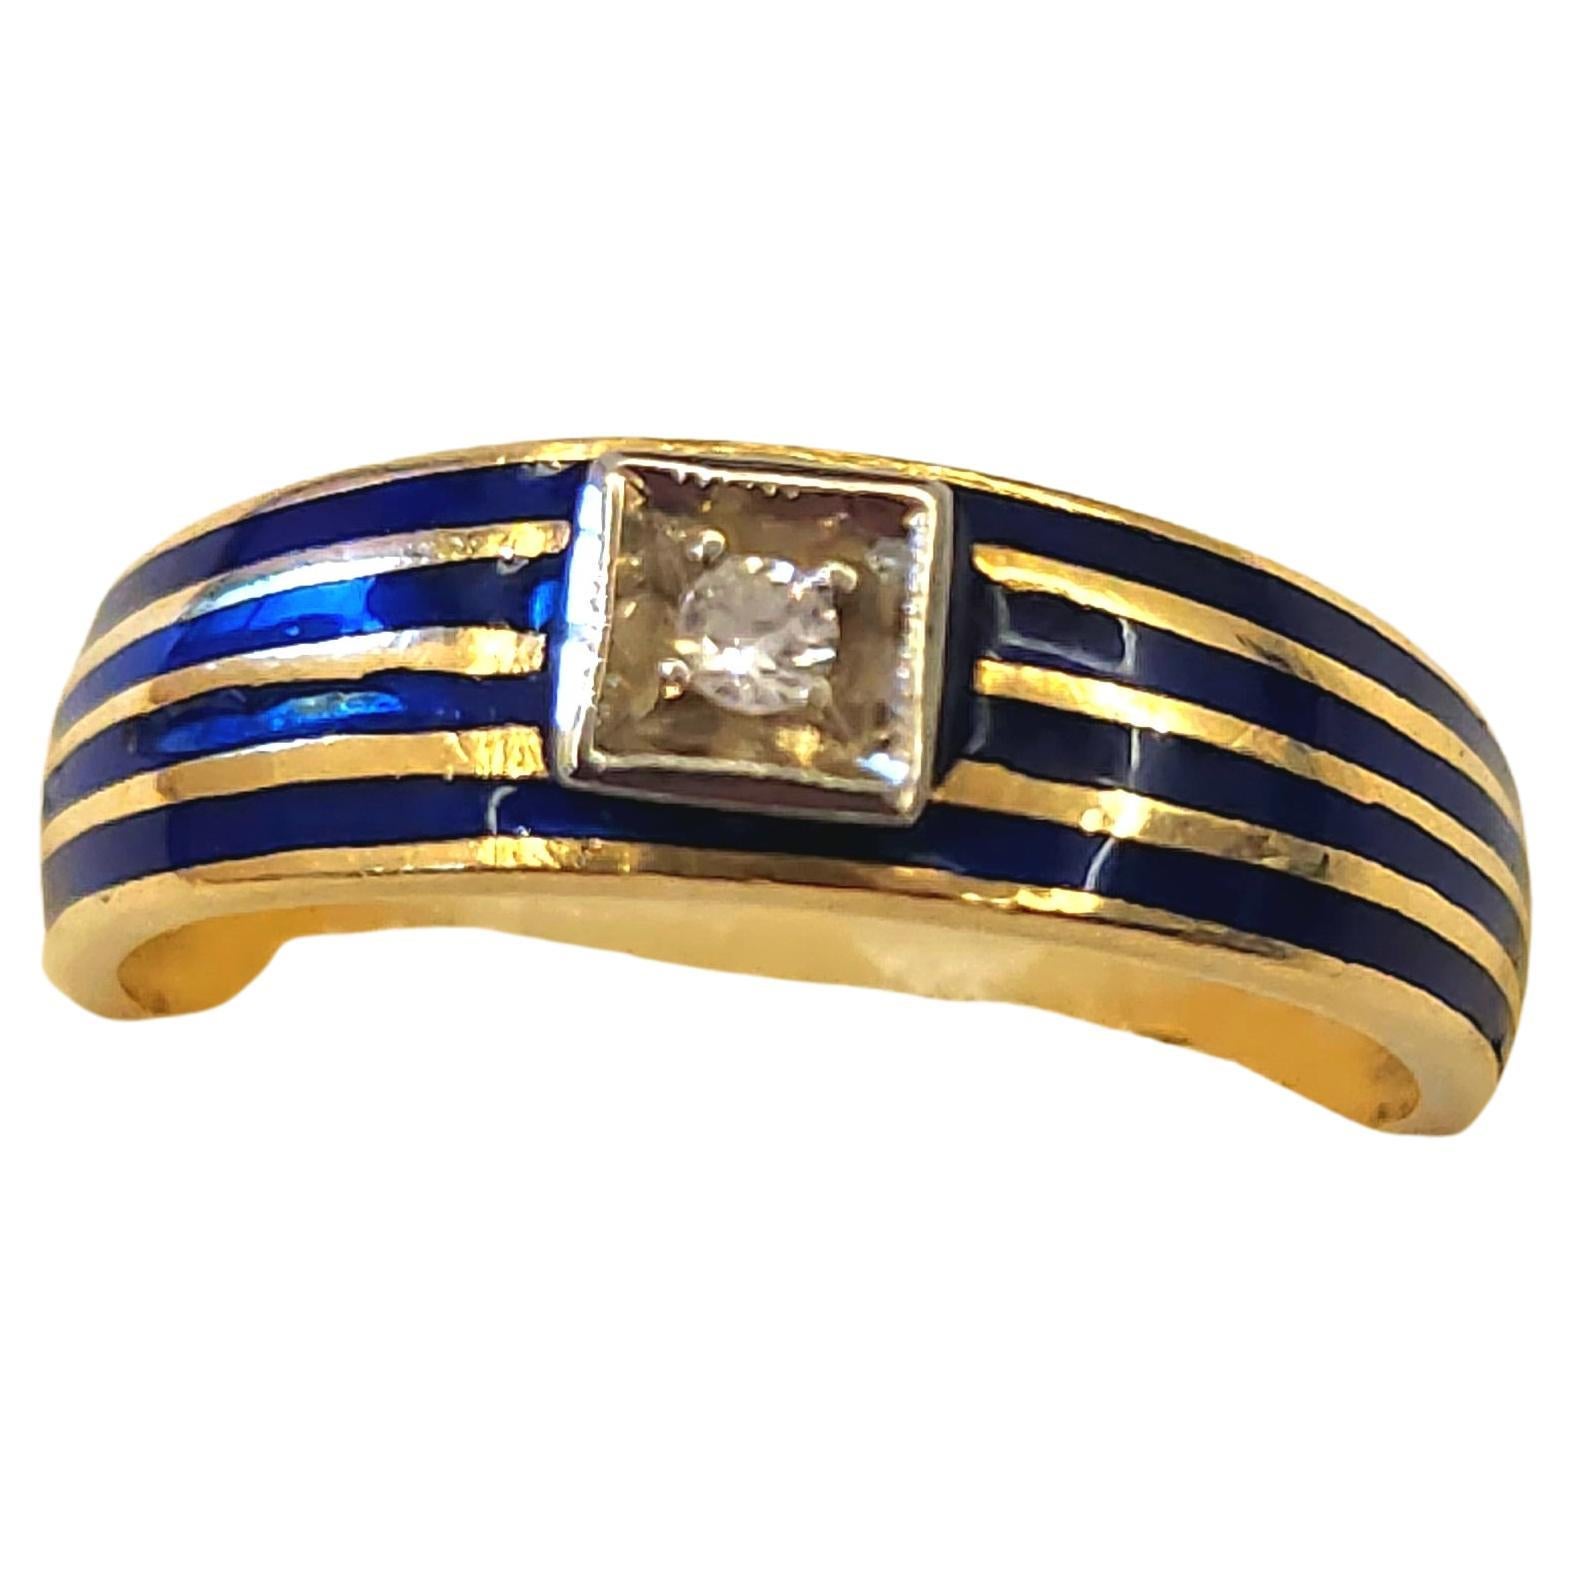 Antique 18k gold unisex in style centeted with 1 old mine cut diamond decorted with navy blue enamel colour stripes ring dates back to europe 1900/1910.c hall marked 750 for 18k gold purity